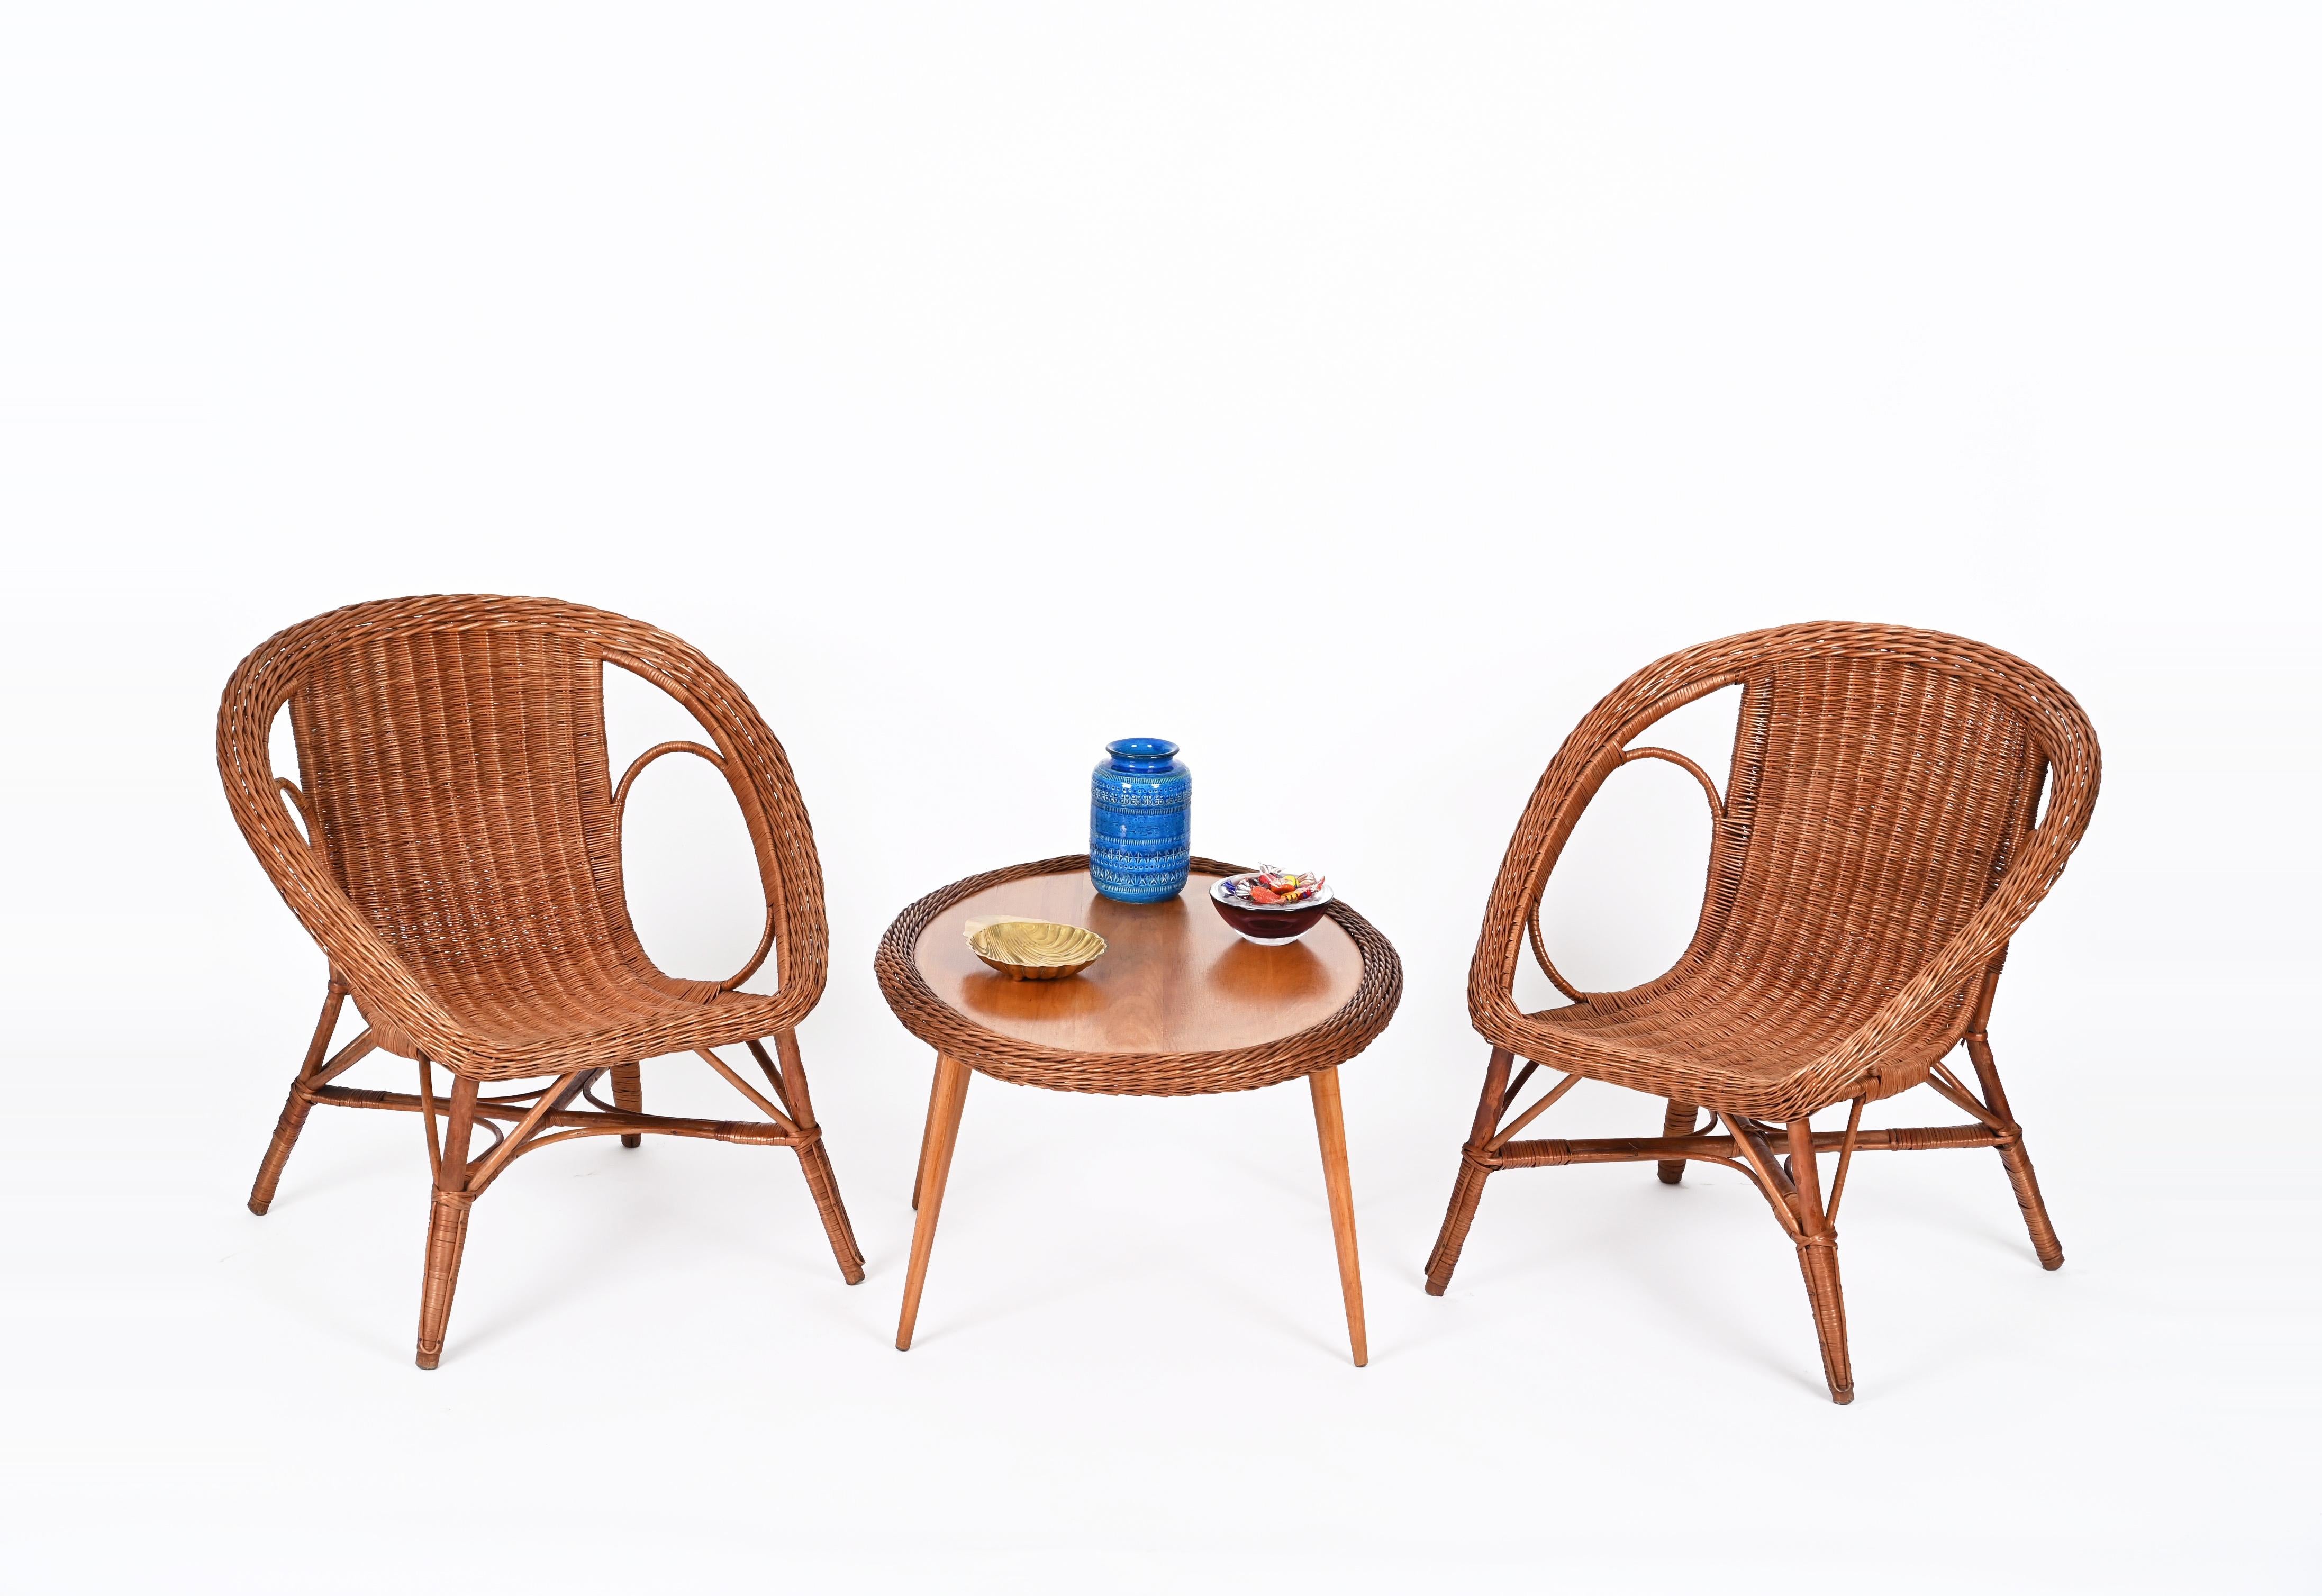 20th Century Set of Three Wicker and Wood Armchairs and Table, Italy 1960s For Sale